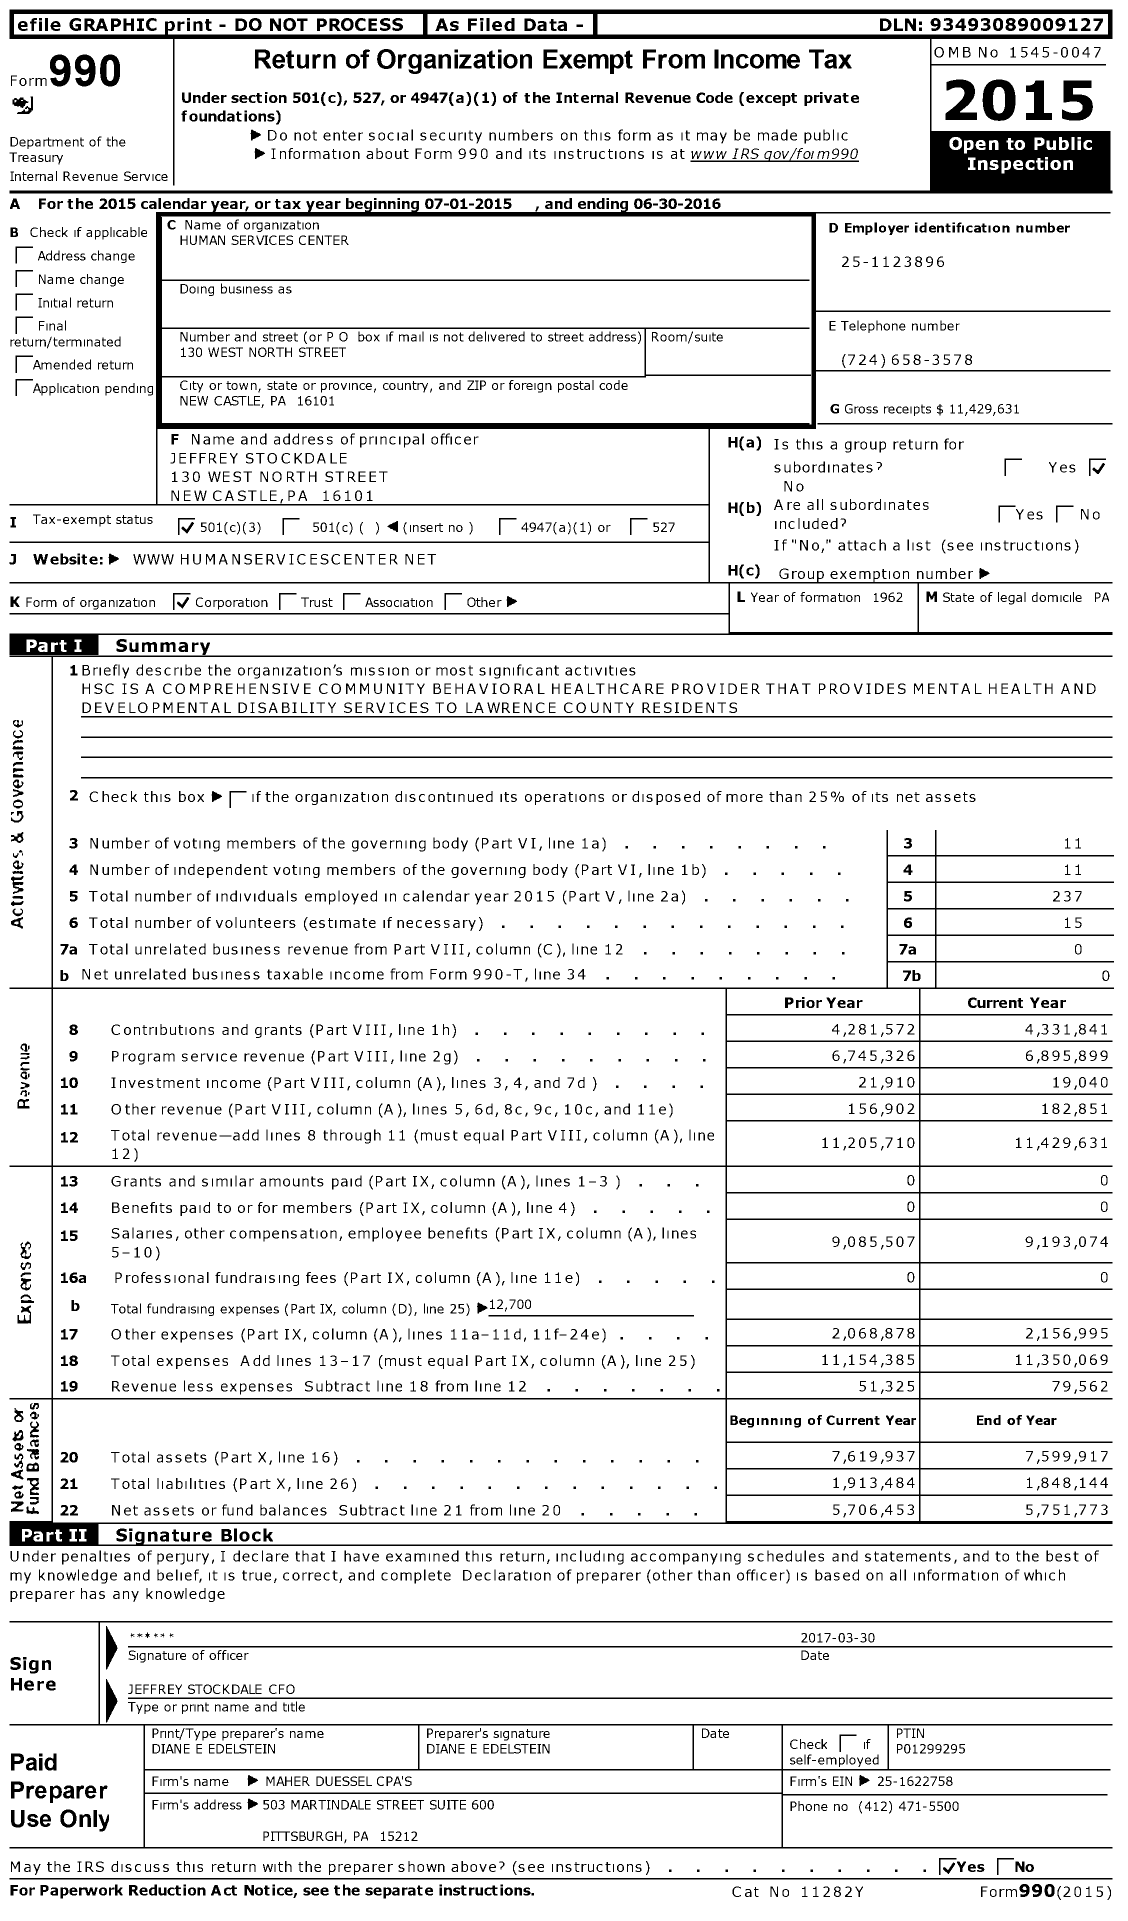 Image of first page of 2015 Form 990 for Human Services Center (HSC)